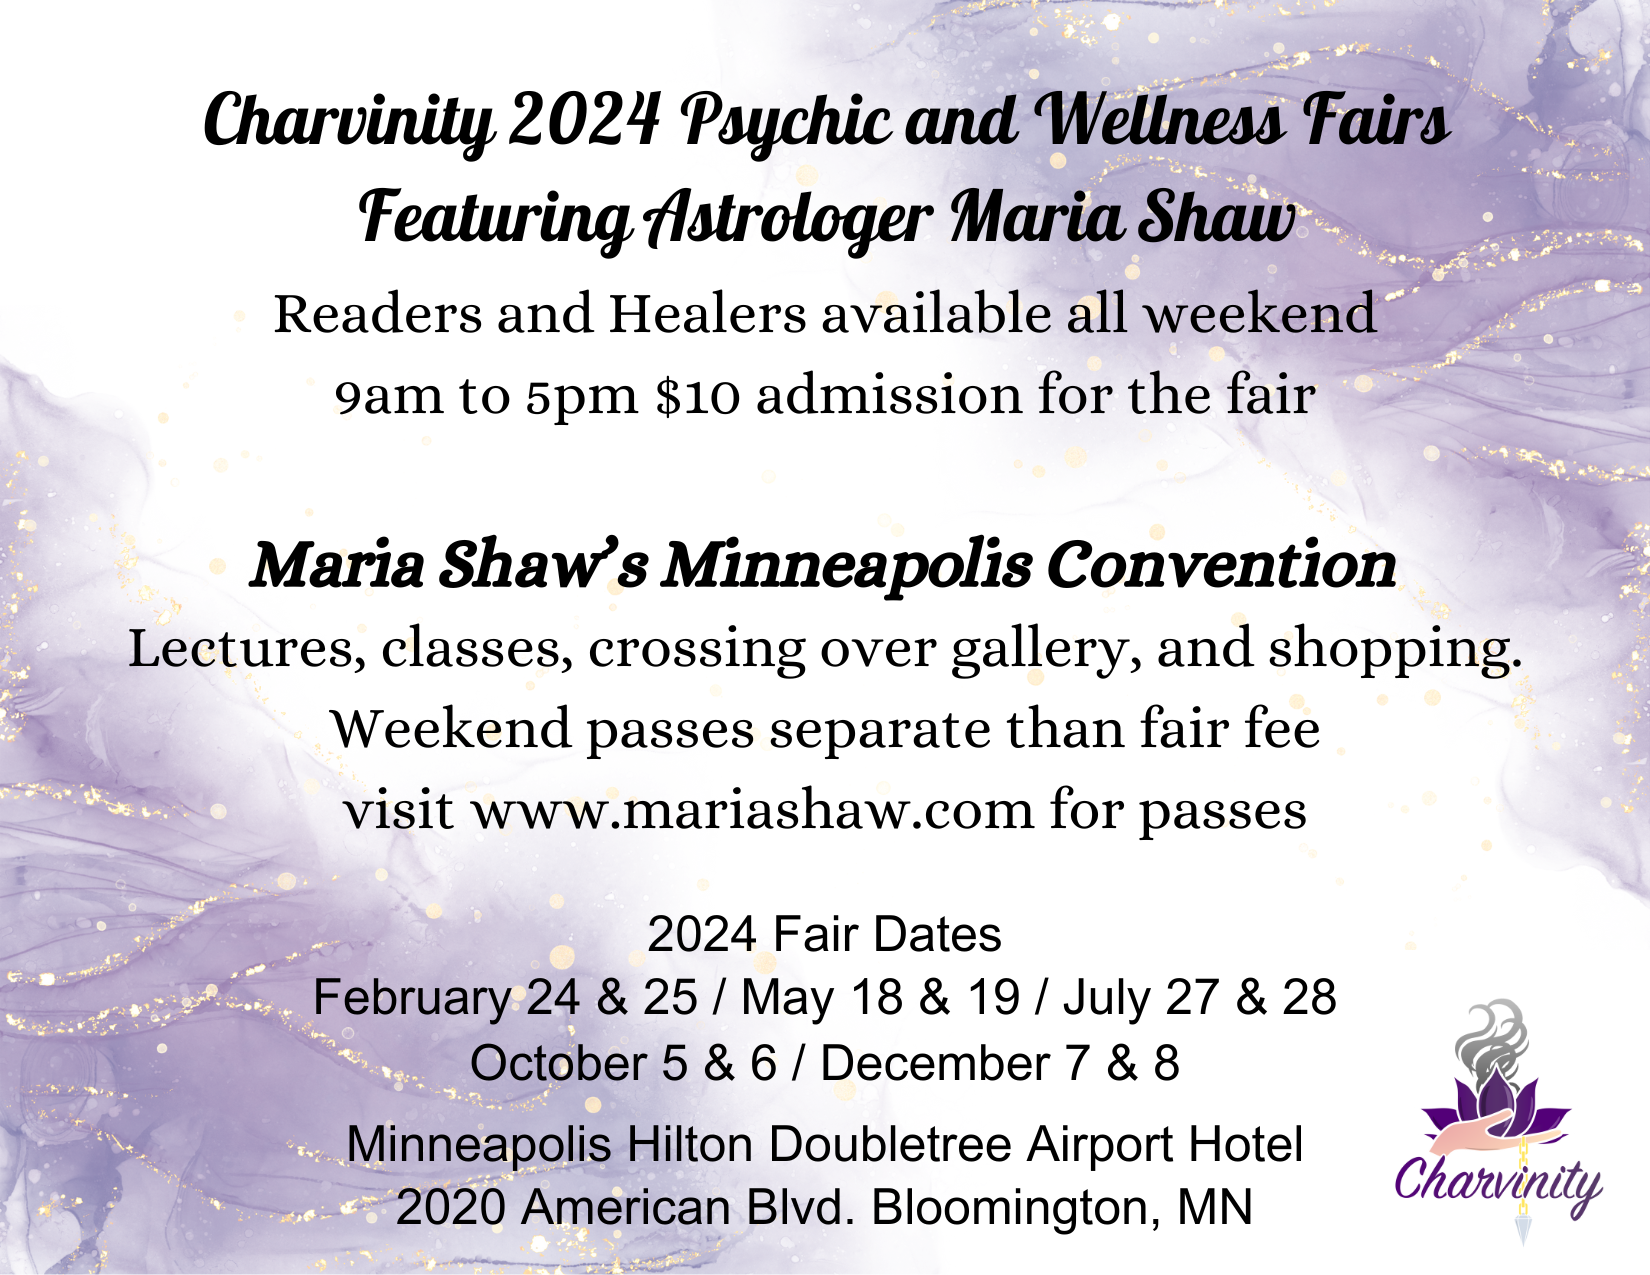 Charvinity Psychic and Healing Fair